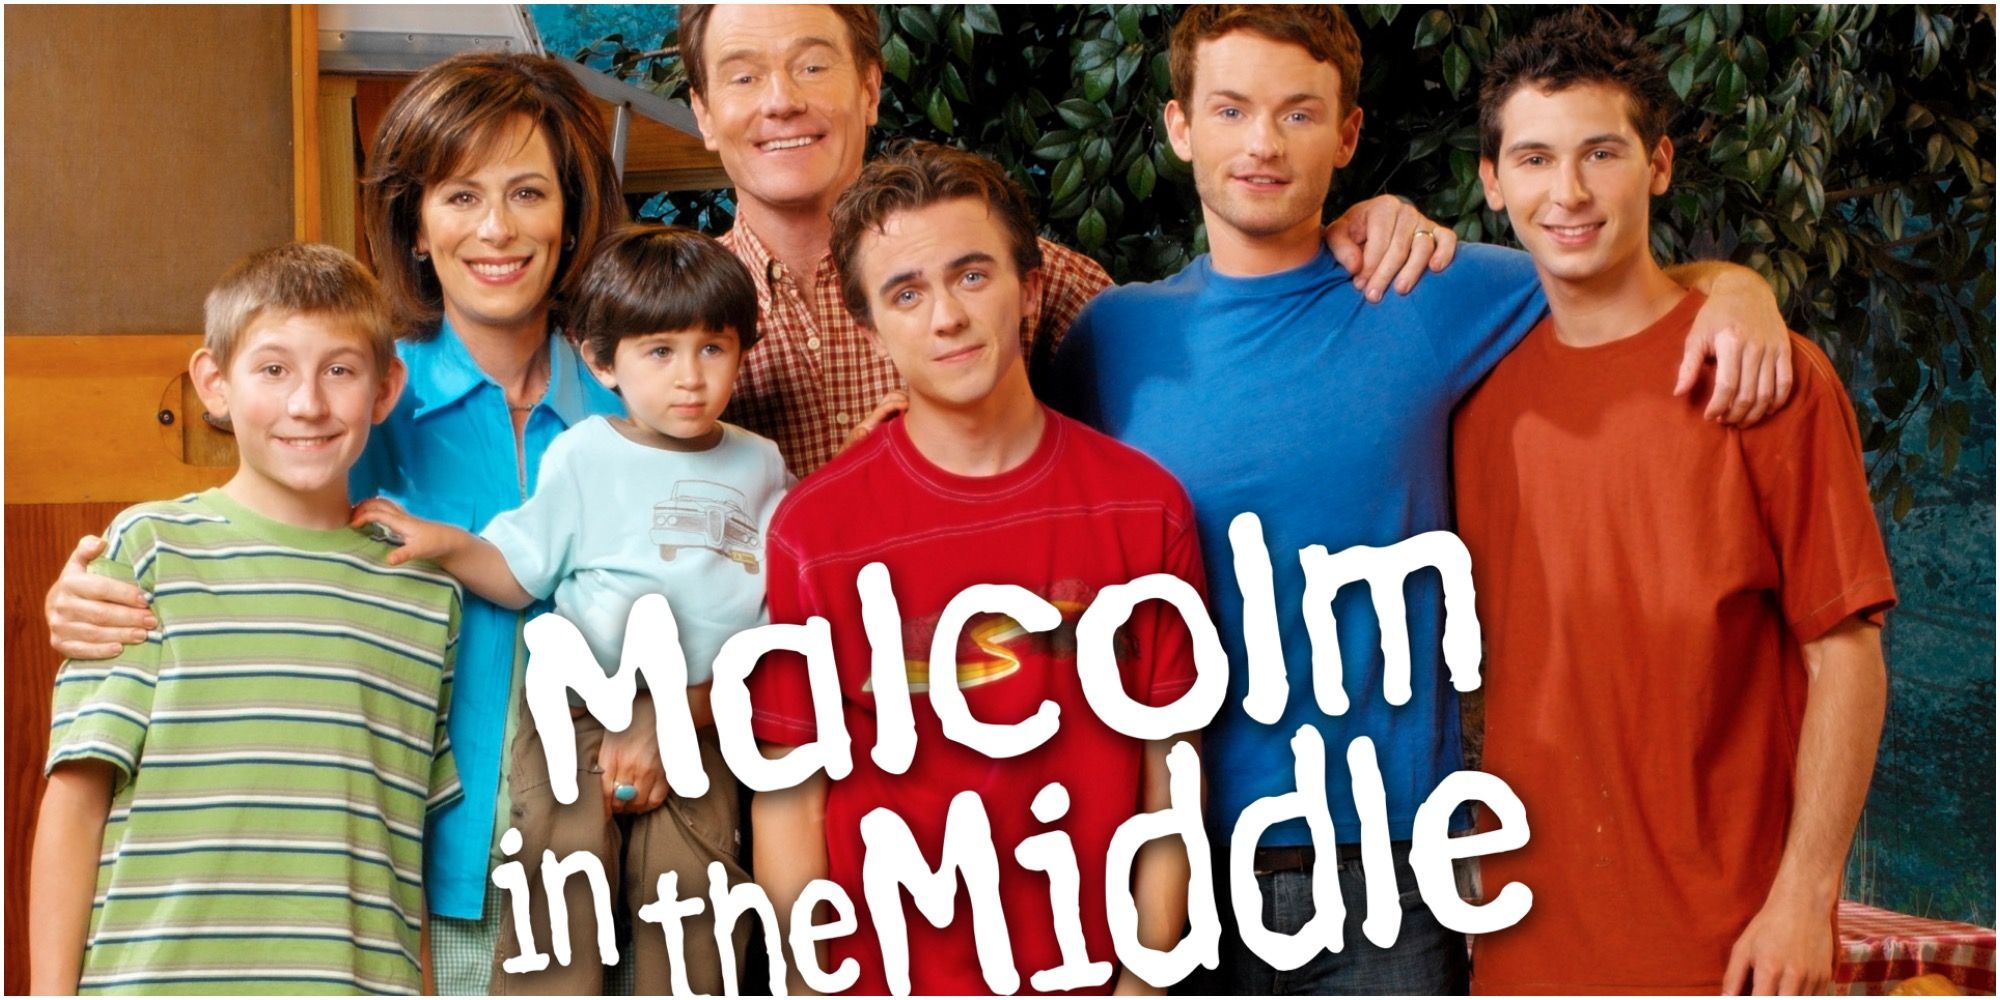 Malcolm In the Middle Photo Of The Cast Members